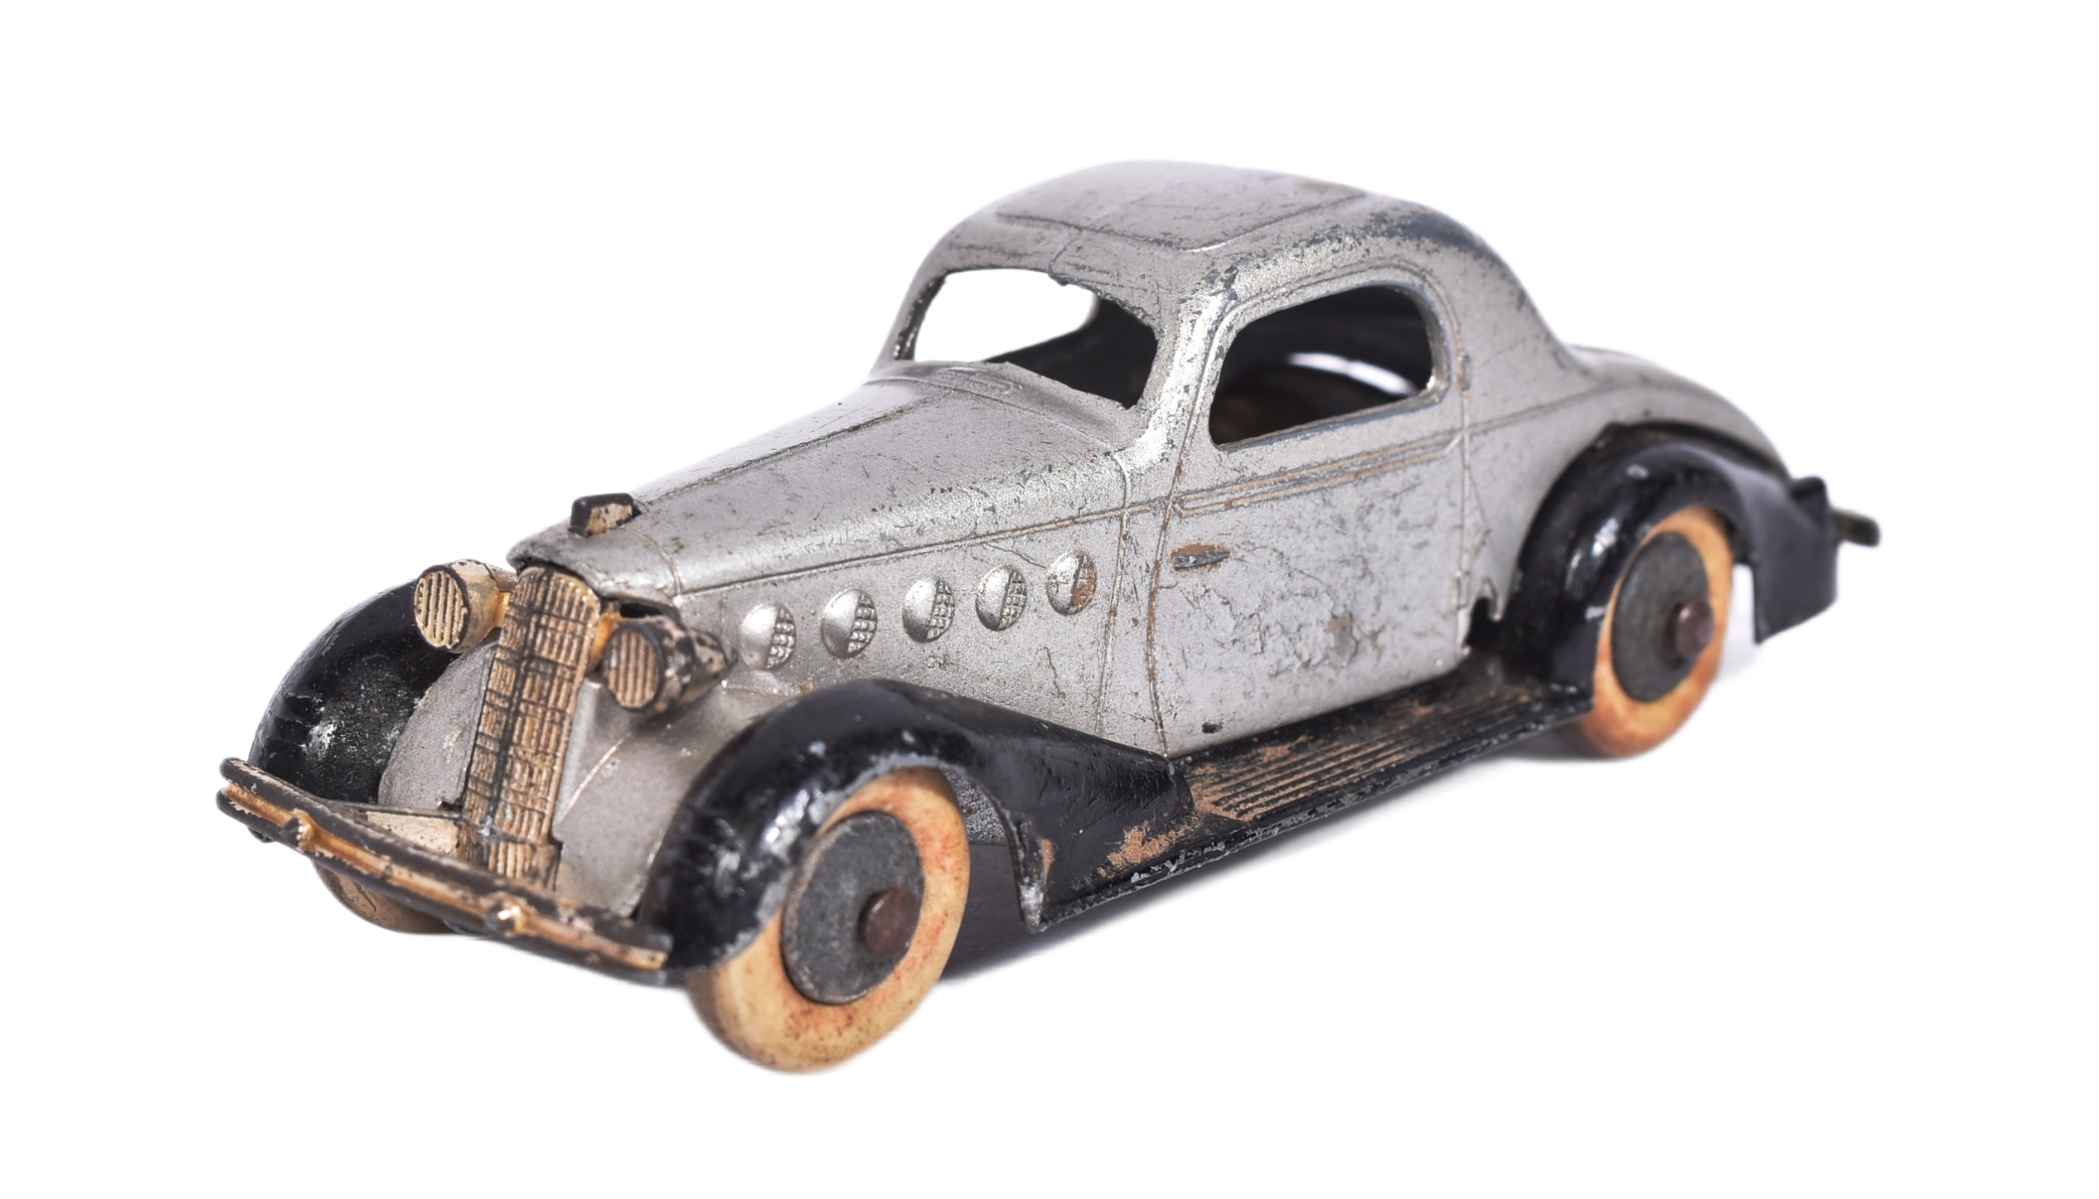 TOOTSIETOYS - PRE-WAR 1930S LASELLE COUPE DIECAST MODEL